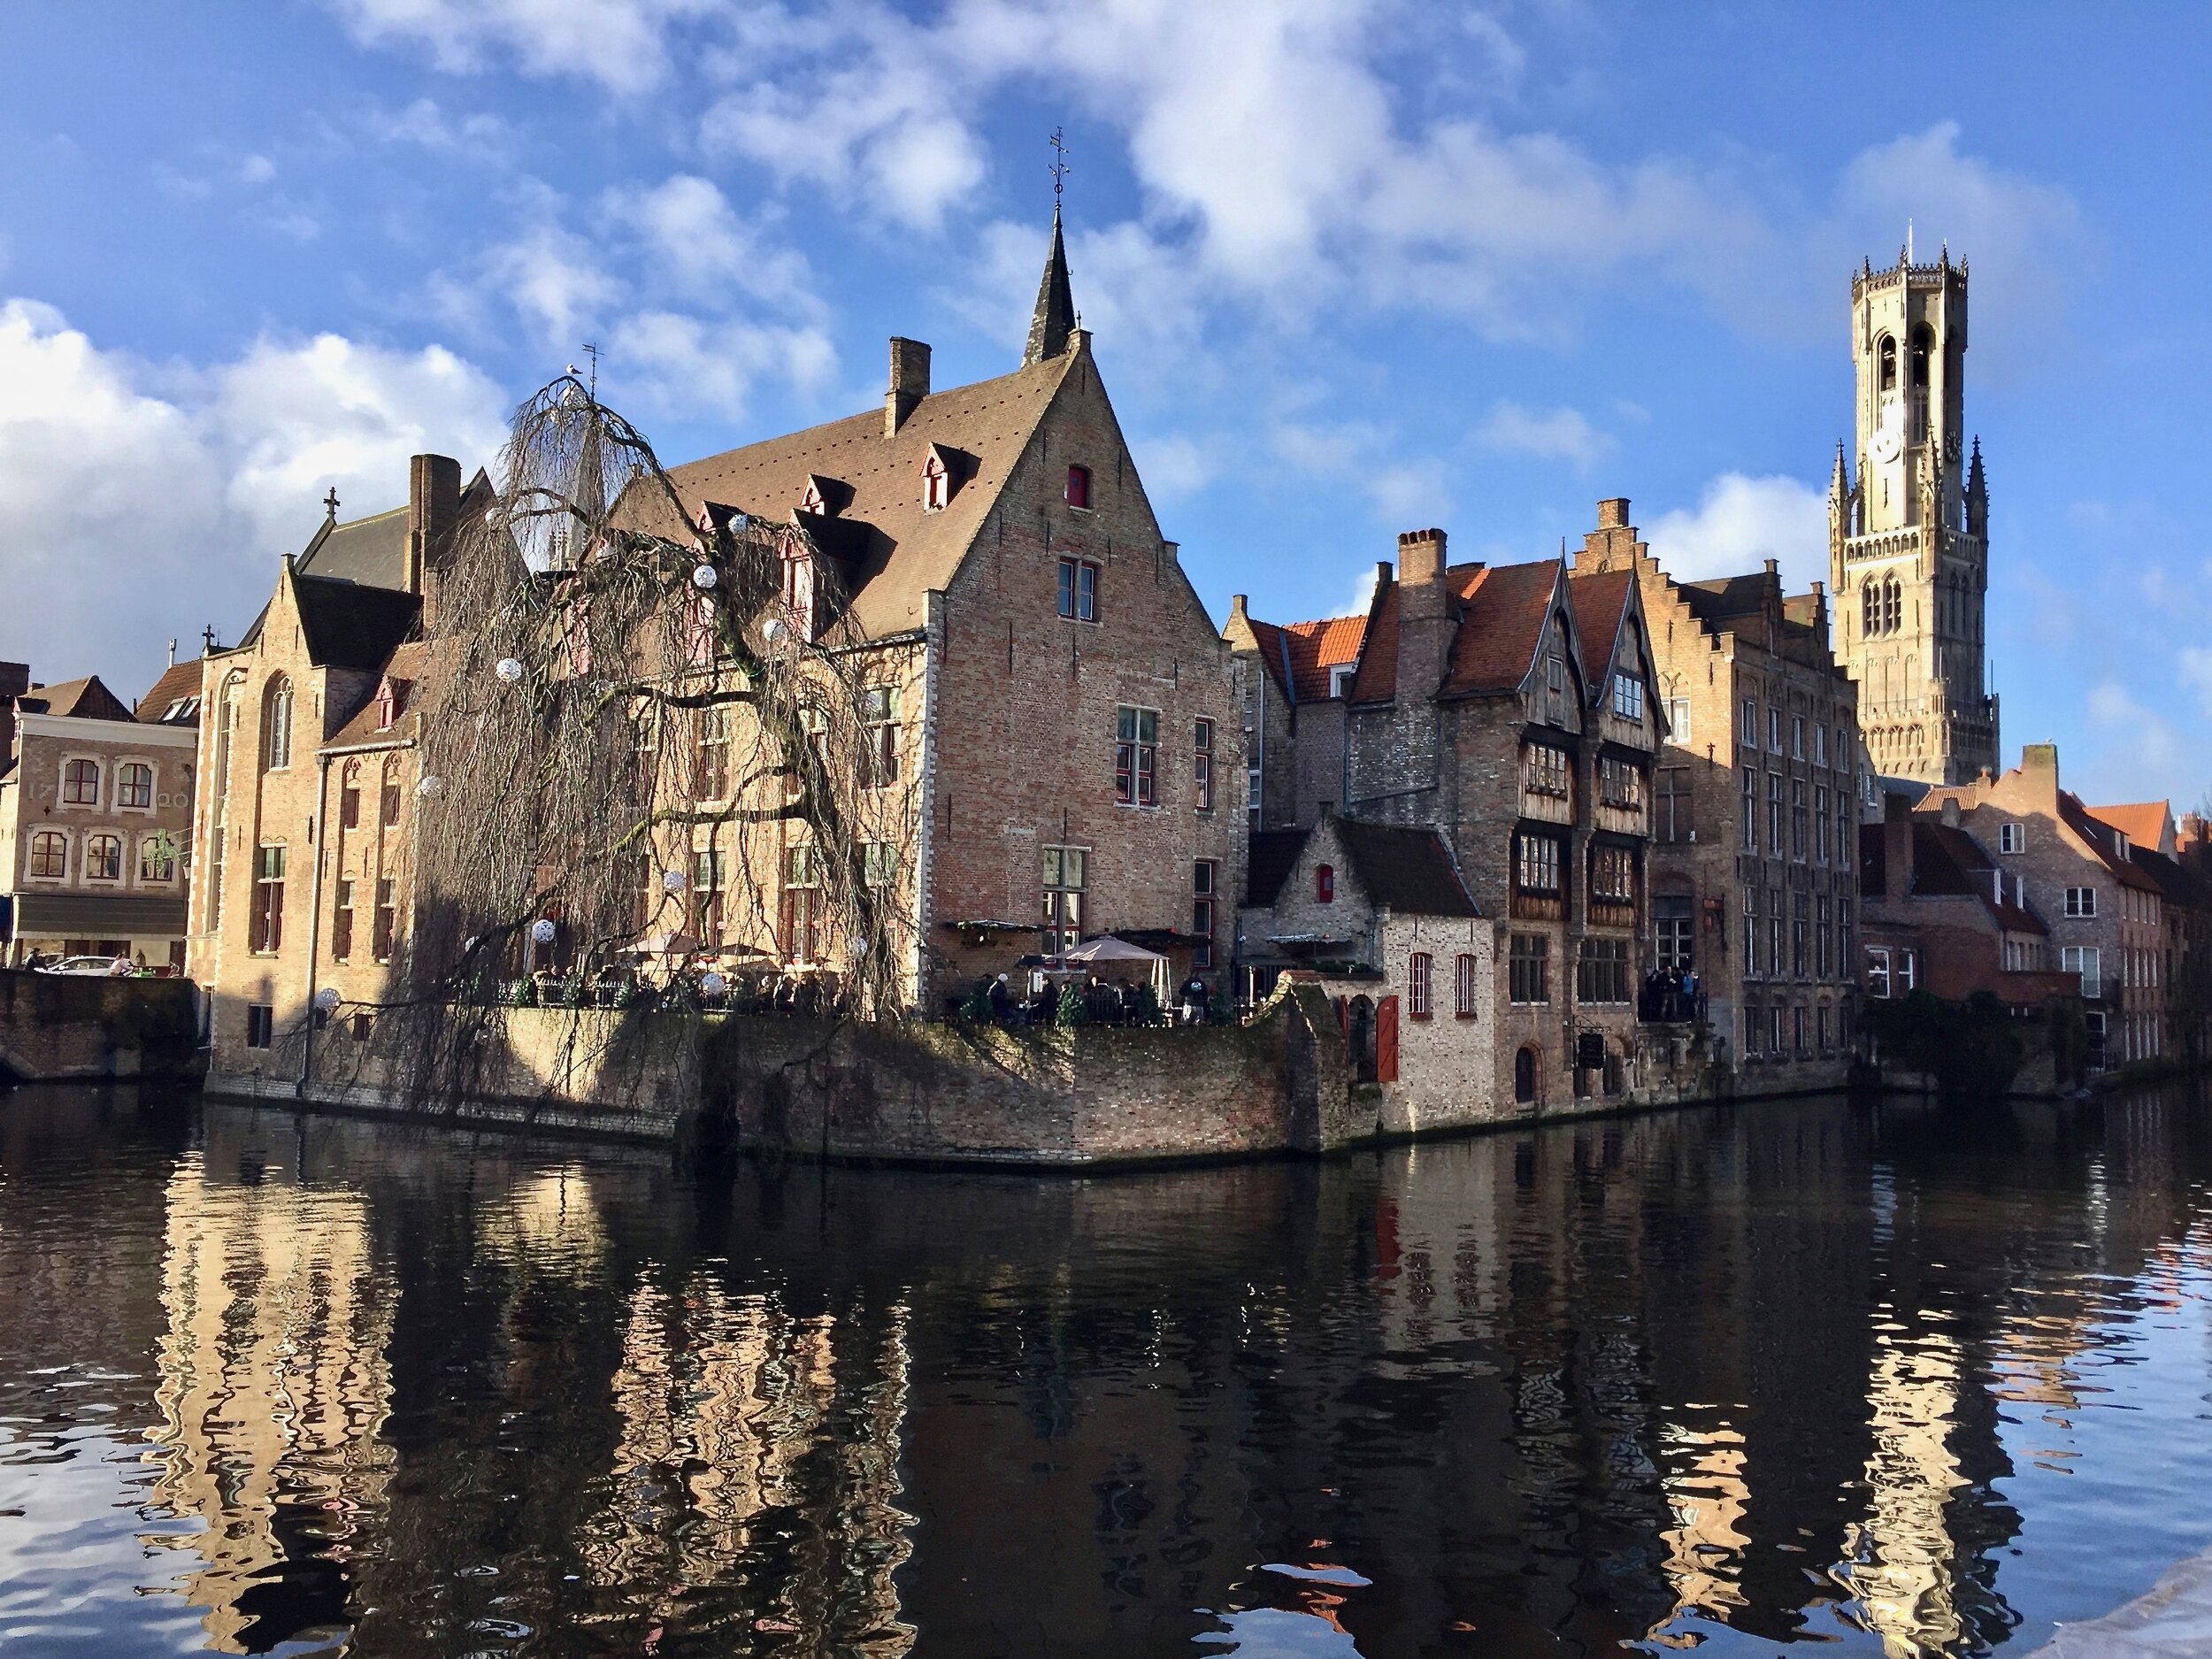 On the canals in Bruges, Belgium